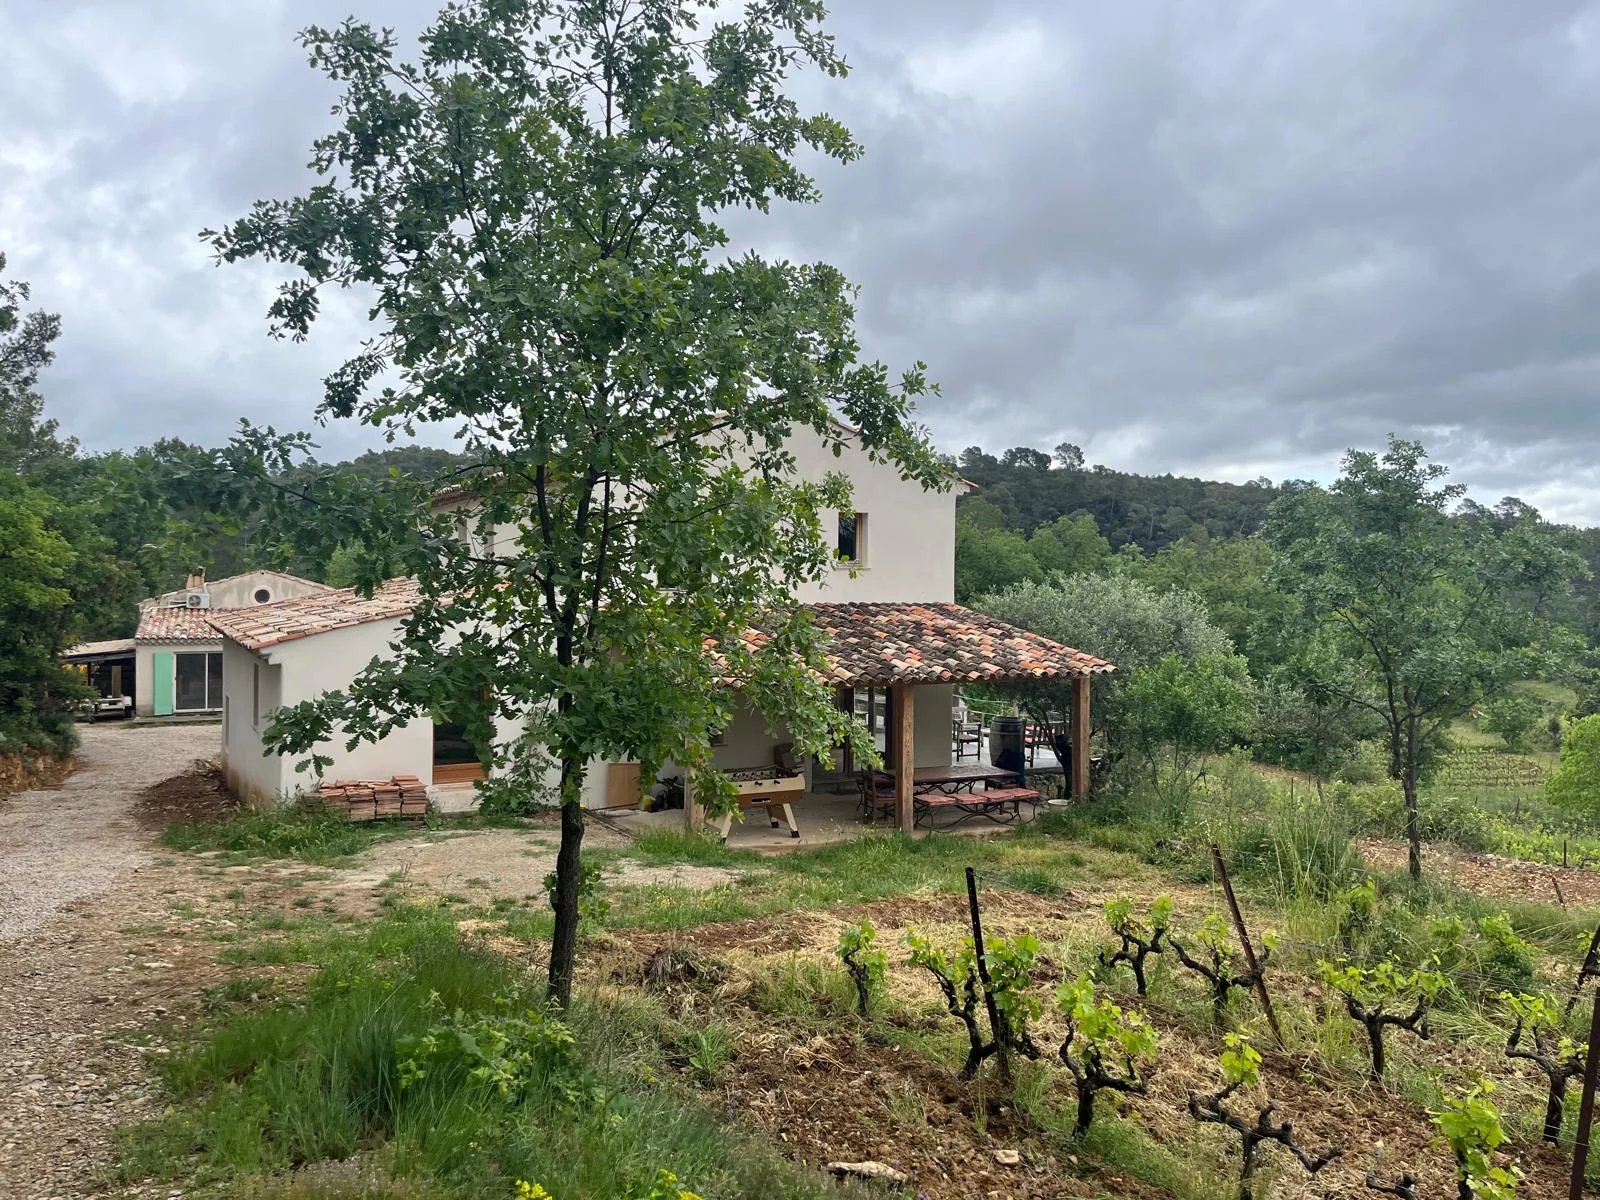 VINEYARD IN PROVENCE CLOSE TO COTIGNAC TO SELL